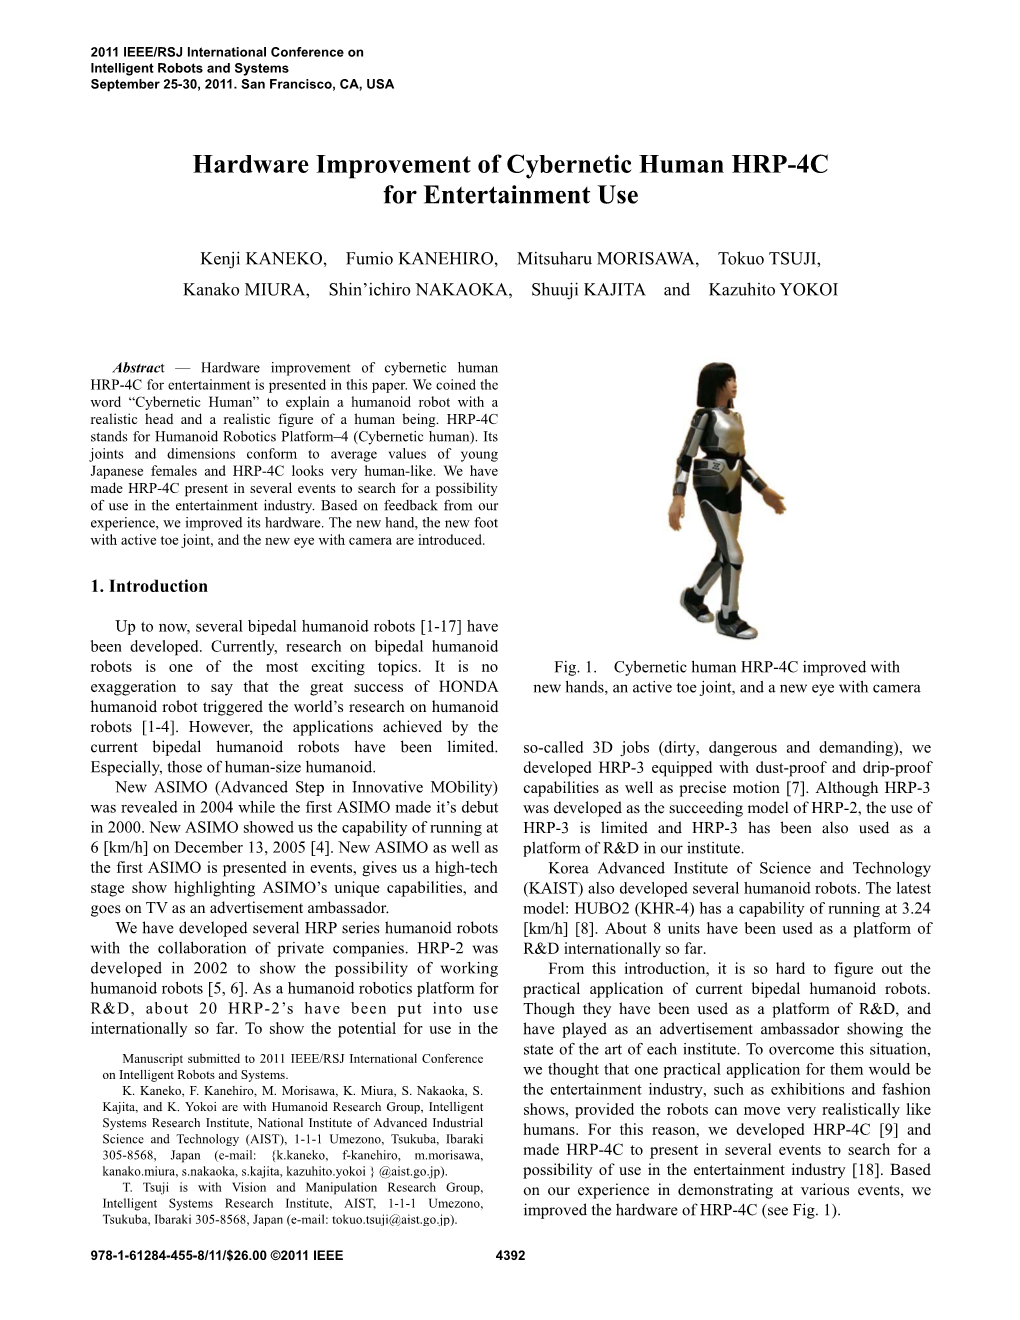 Hardware Improvement of Cybernetic Human HRP-4C for Entertainment Use